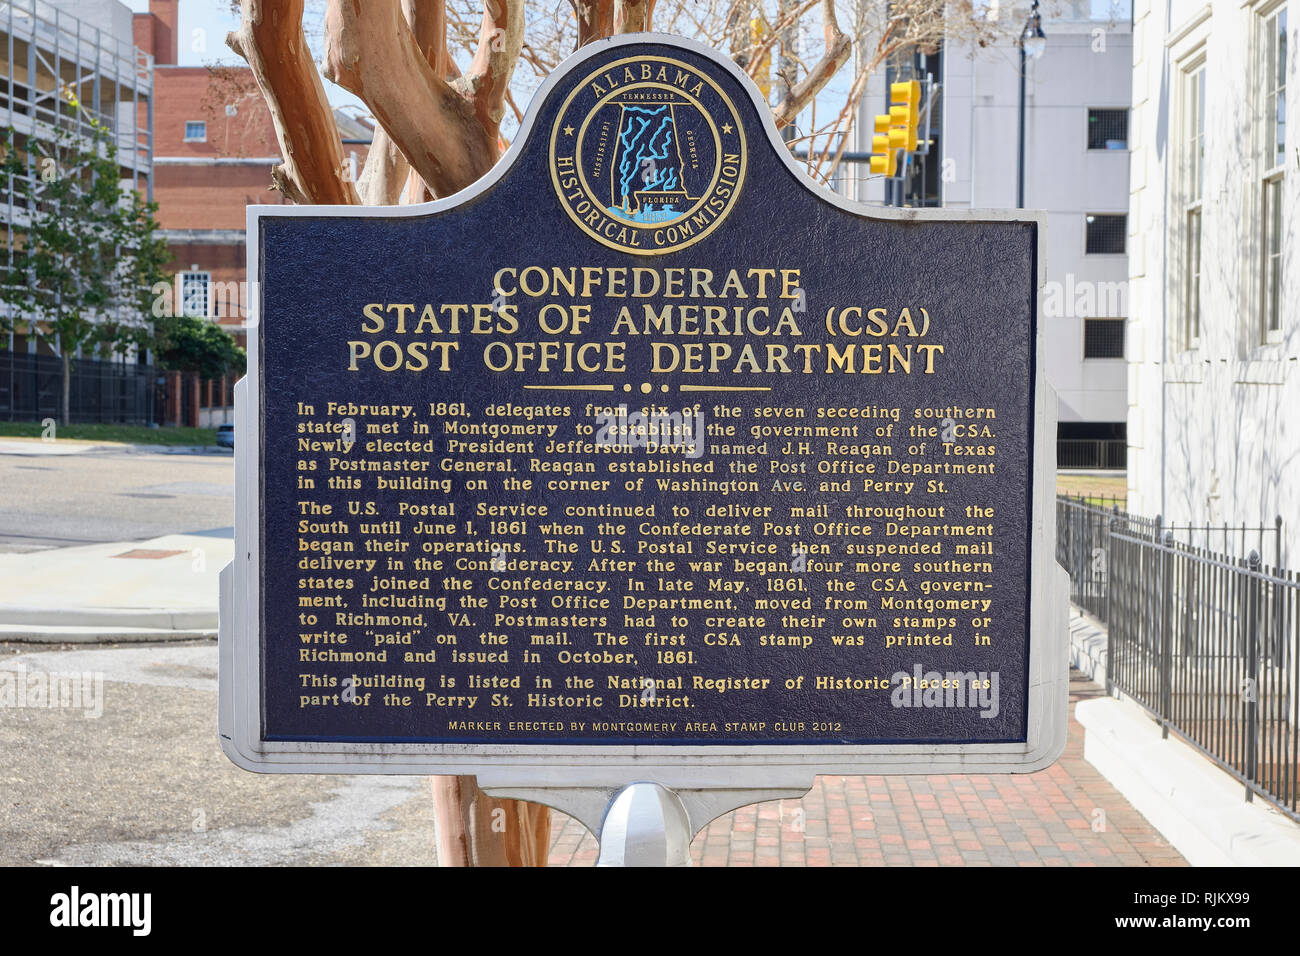 Historical marker for the Confederate States of America (CSA) Post Office Department in downtown Montgomery Alabama, USA. Stock Photo